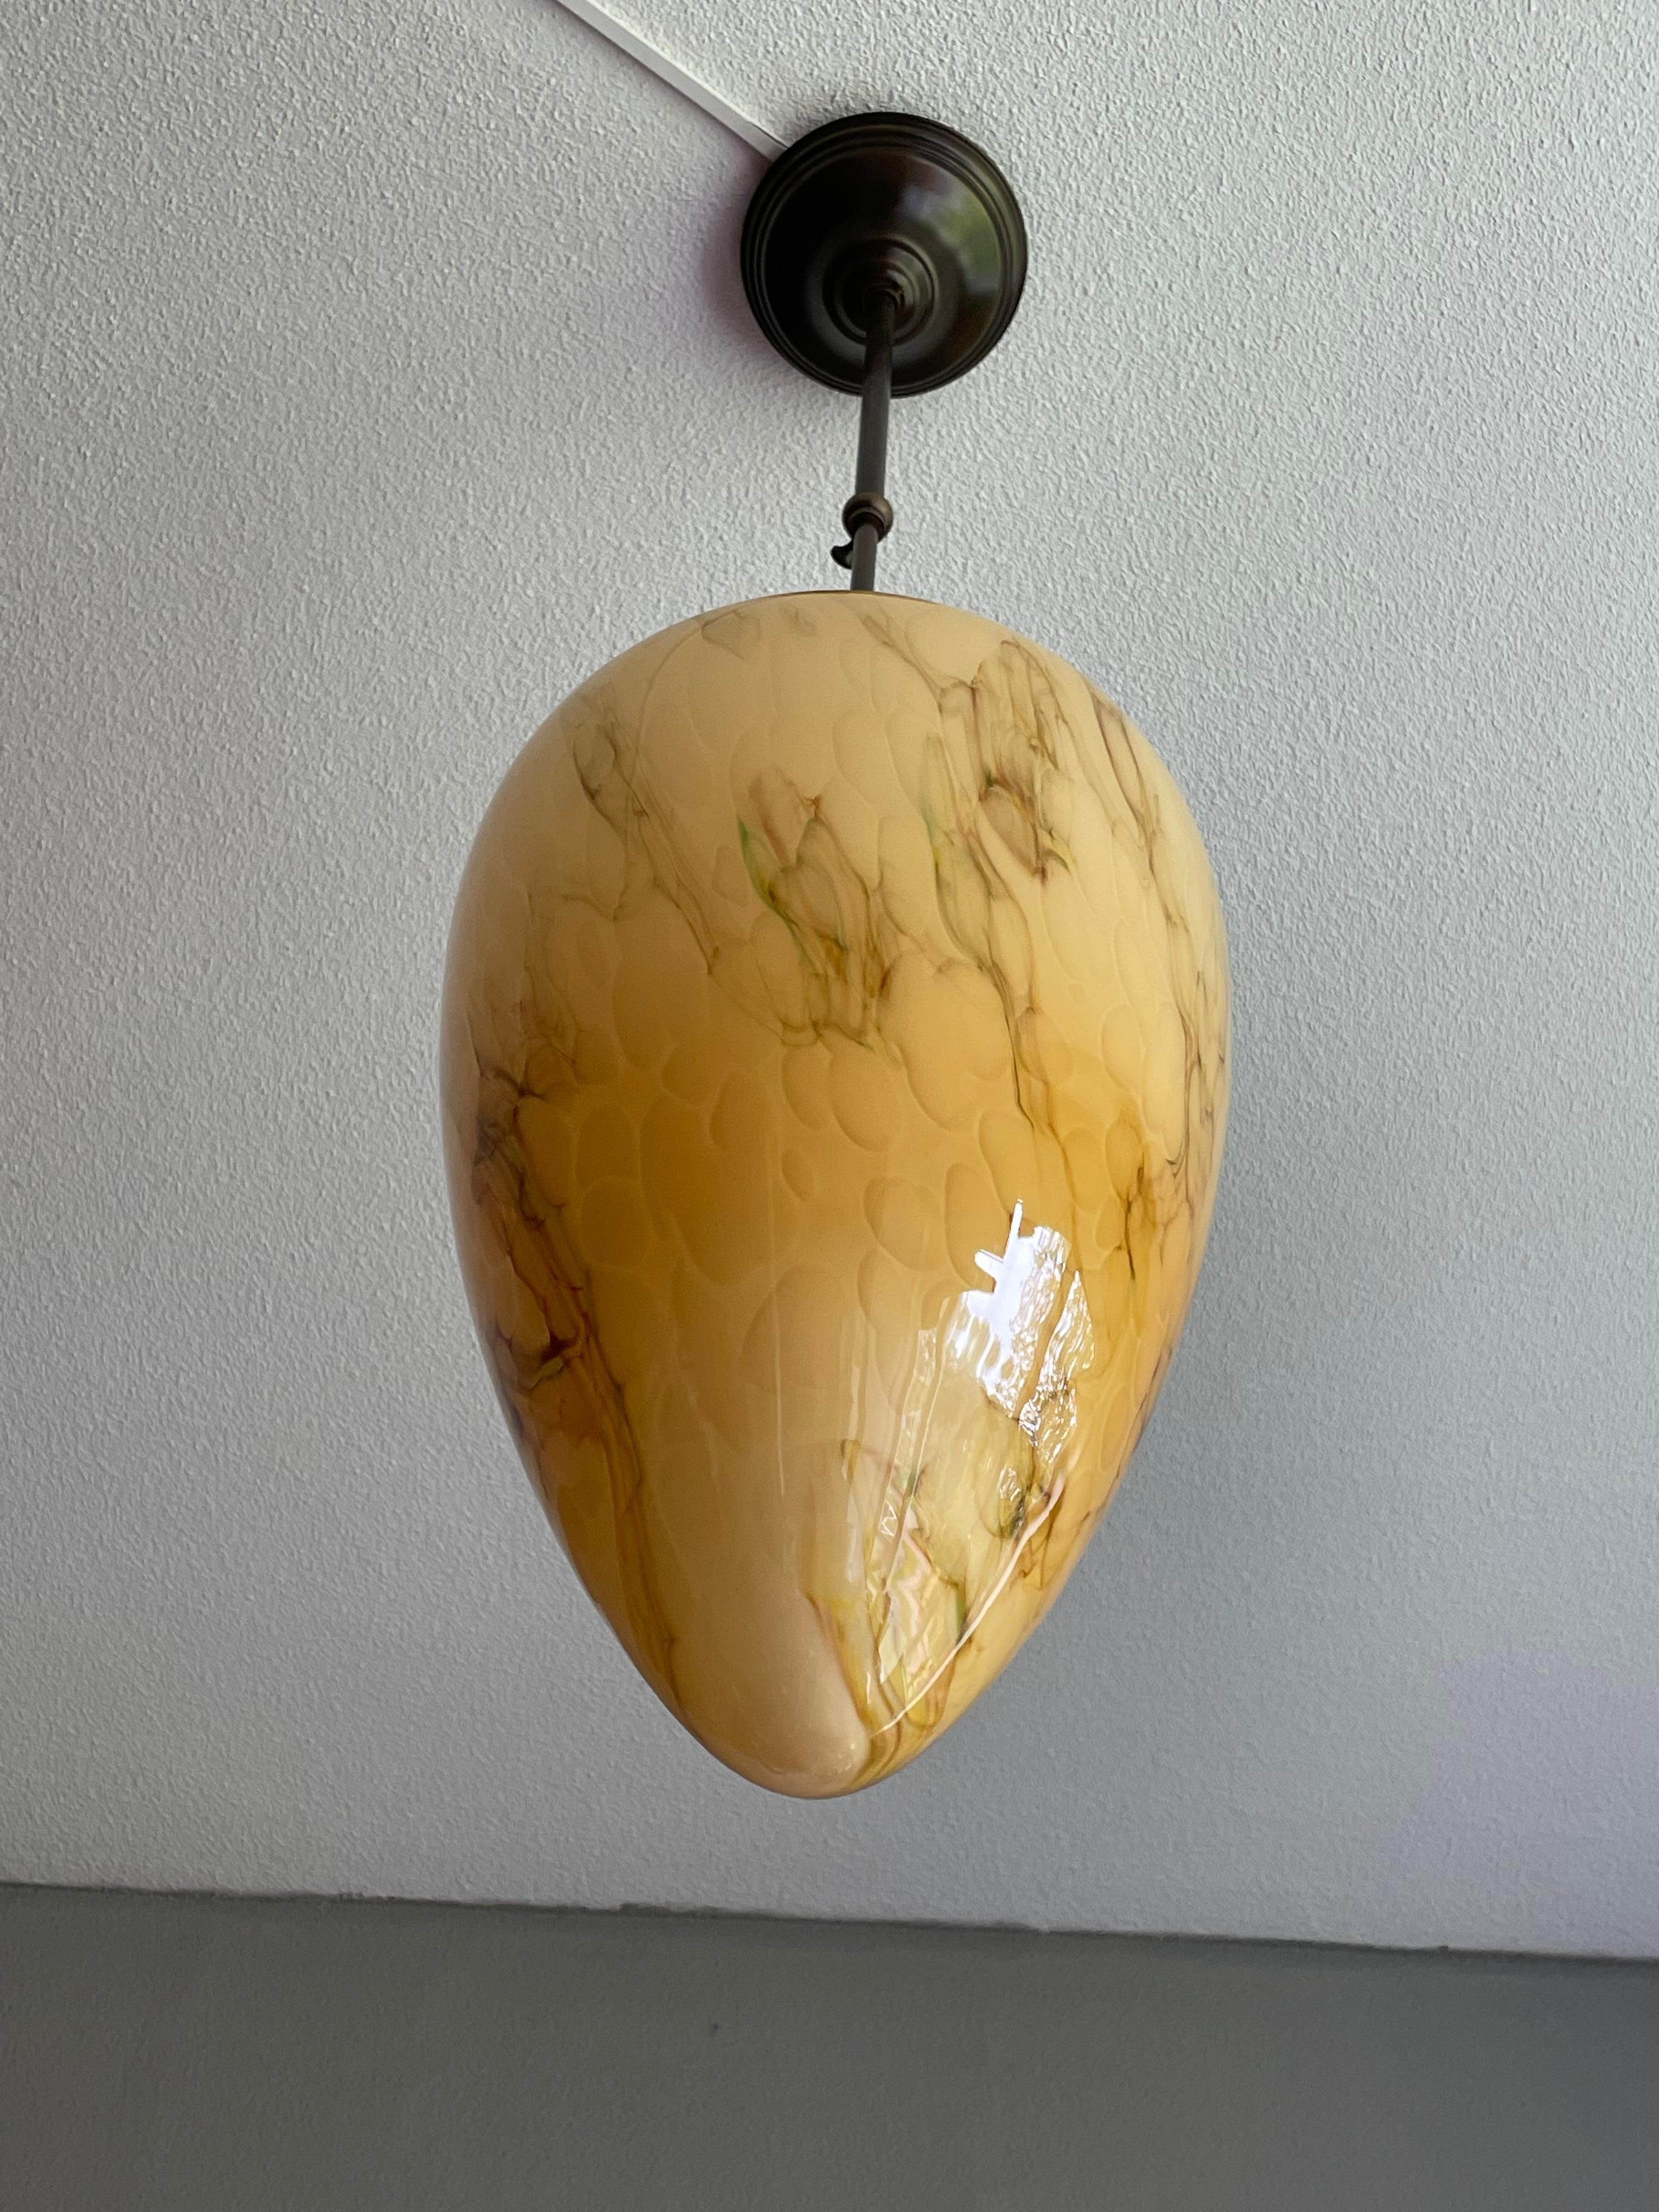 Large Size & Great Cone Shape Midcentury Made Art Deco Style Glass Pendant Light For Sale 11